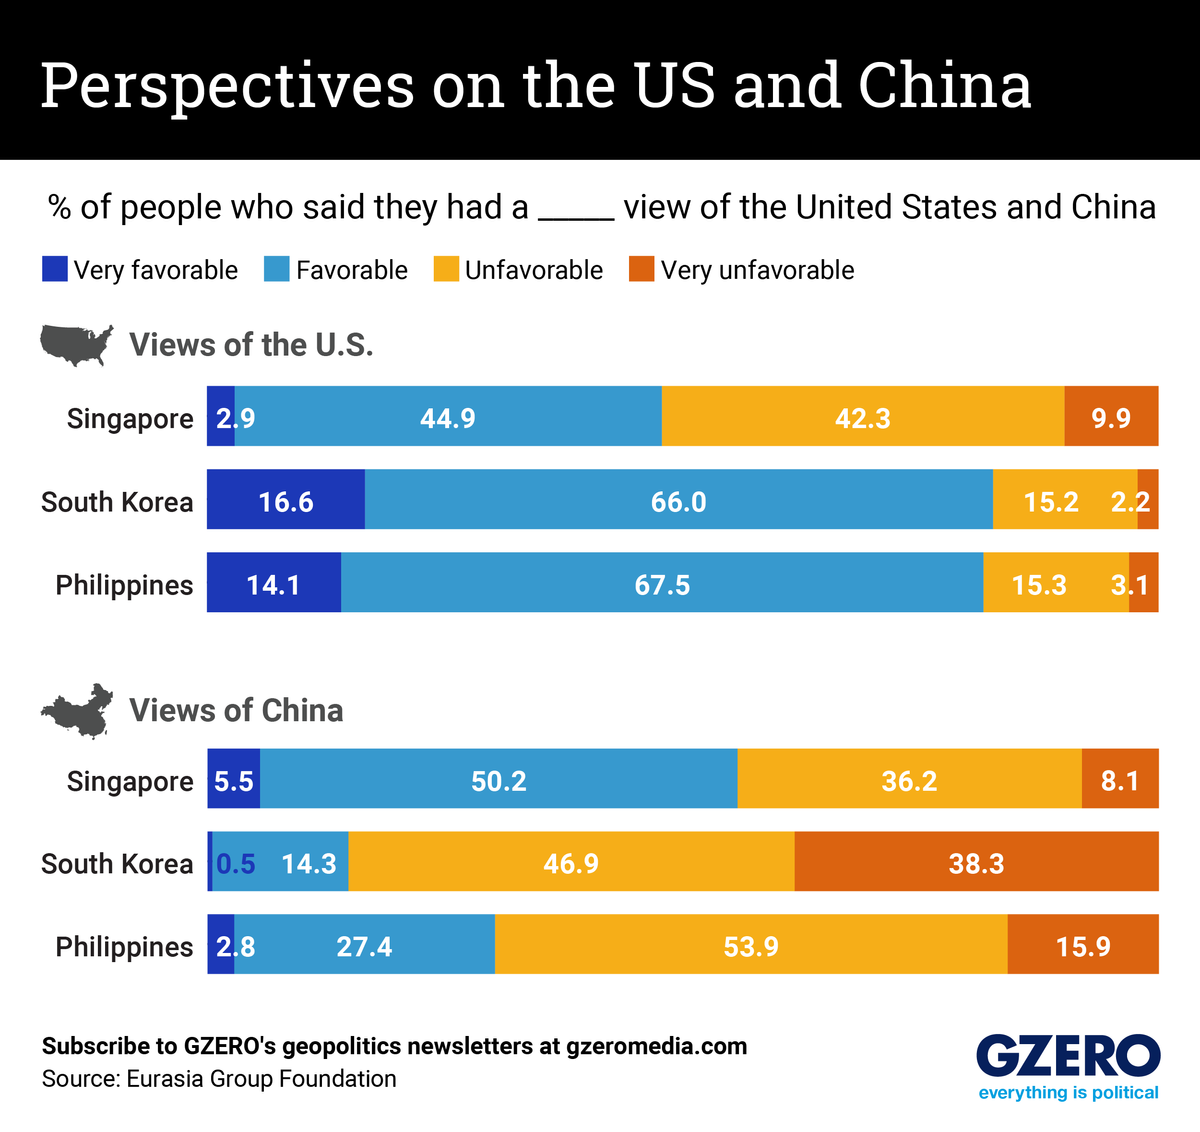 Bar charts of Singapore, South Korea, and the Philippines's views on the US and China